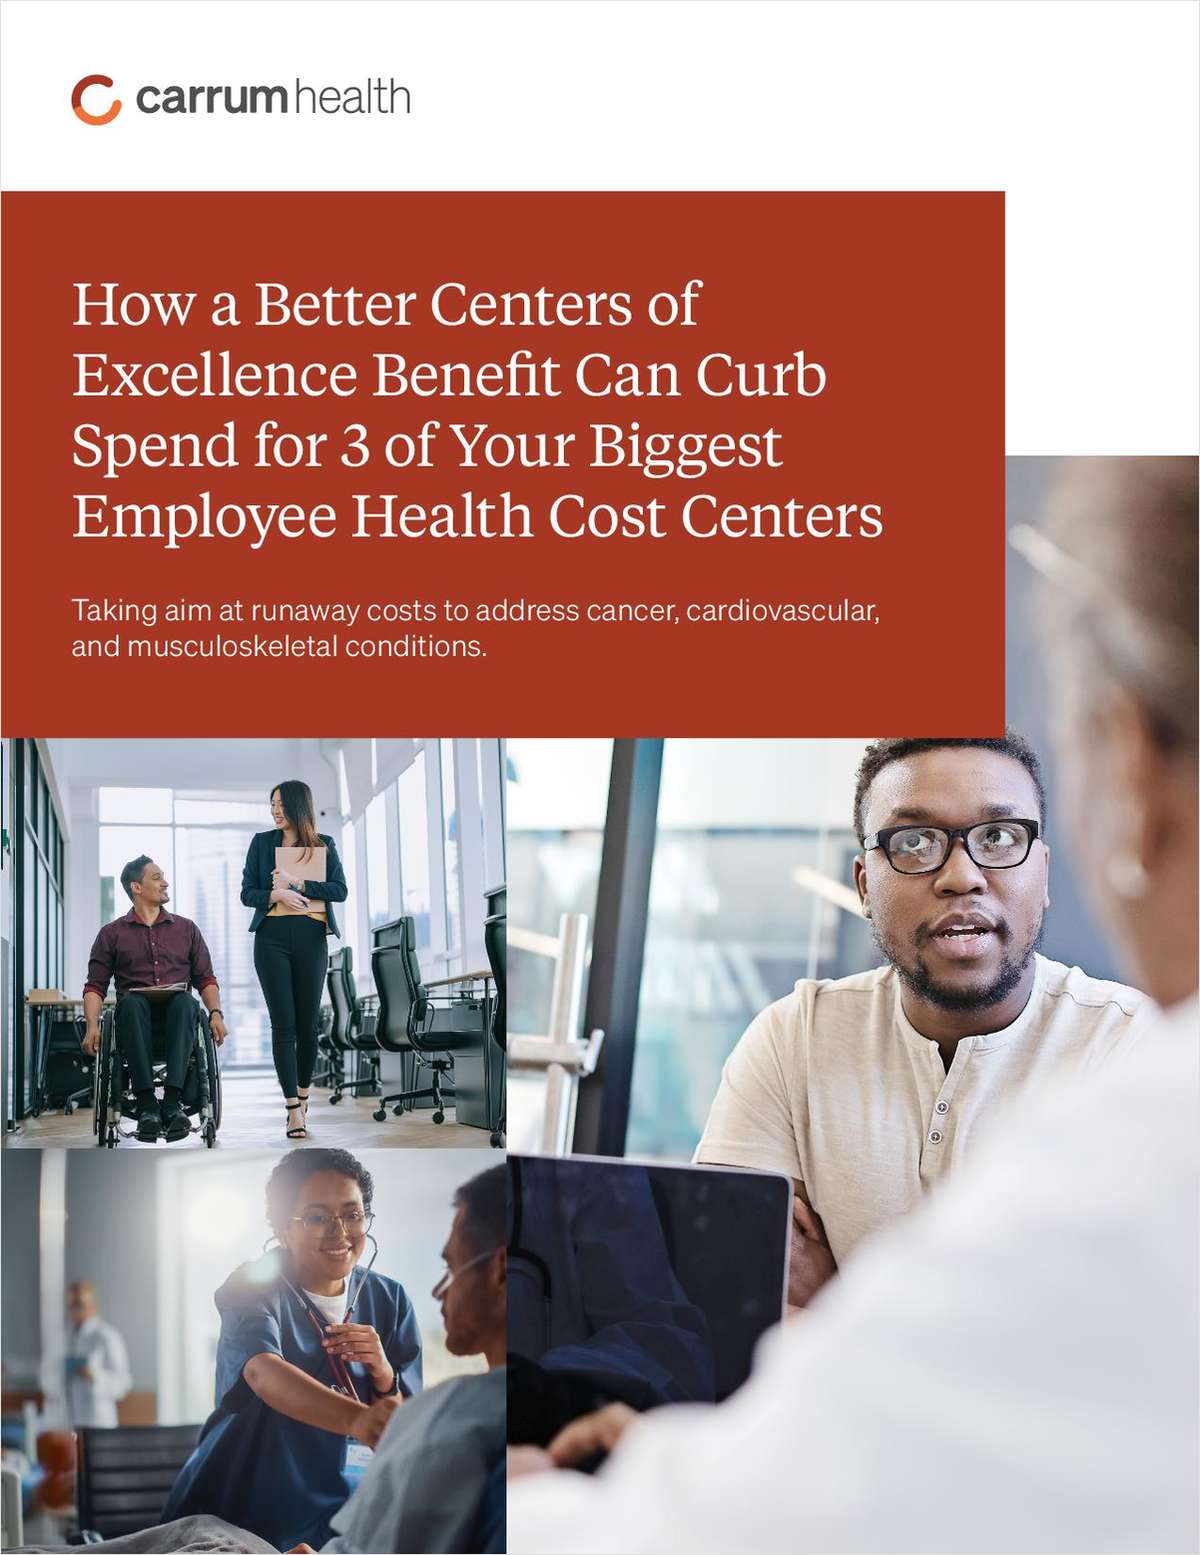 How Benefits Leaders Can Curb Spend on Your 3 Biggest Employee Health Cost Centers